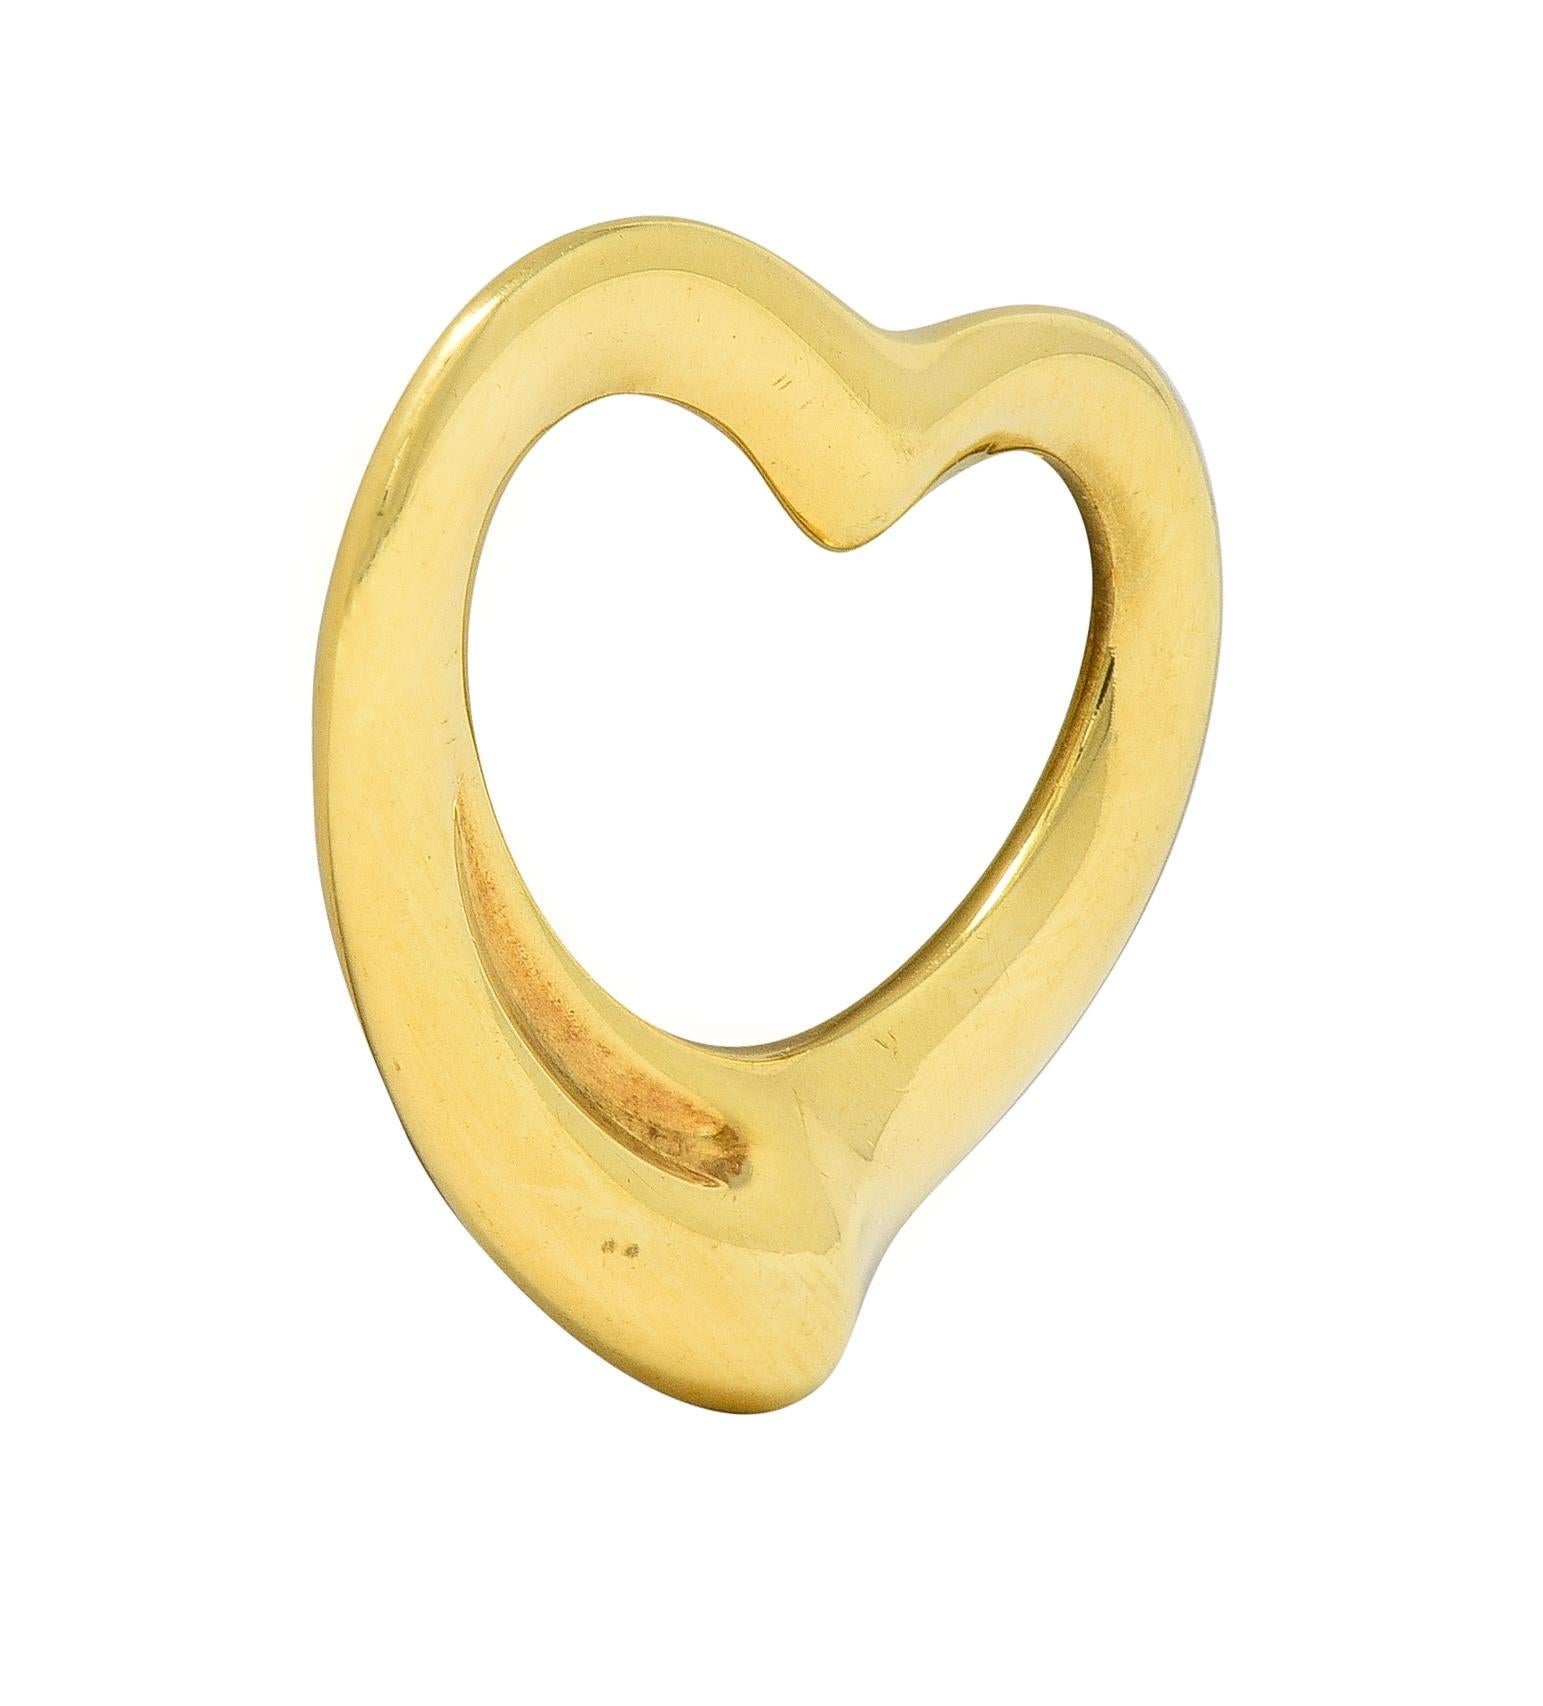 Designed as a sinuous yellow gold heart 
With pierced center and organic edges
With high polish finish
Stamped for 18 karat gold
Fully signed for Tiffany & Co. Elsa Peretti, Spain
Circa: 2000s; from the Open Heart Collection
Measures: 3/4 x 7/8